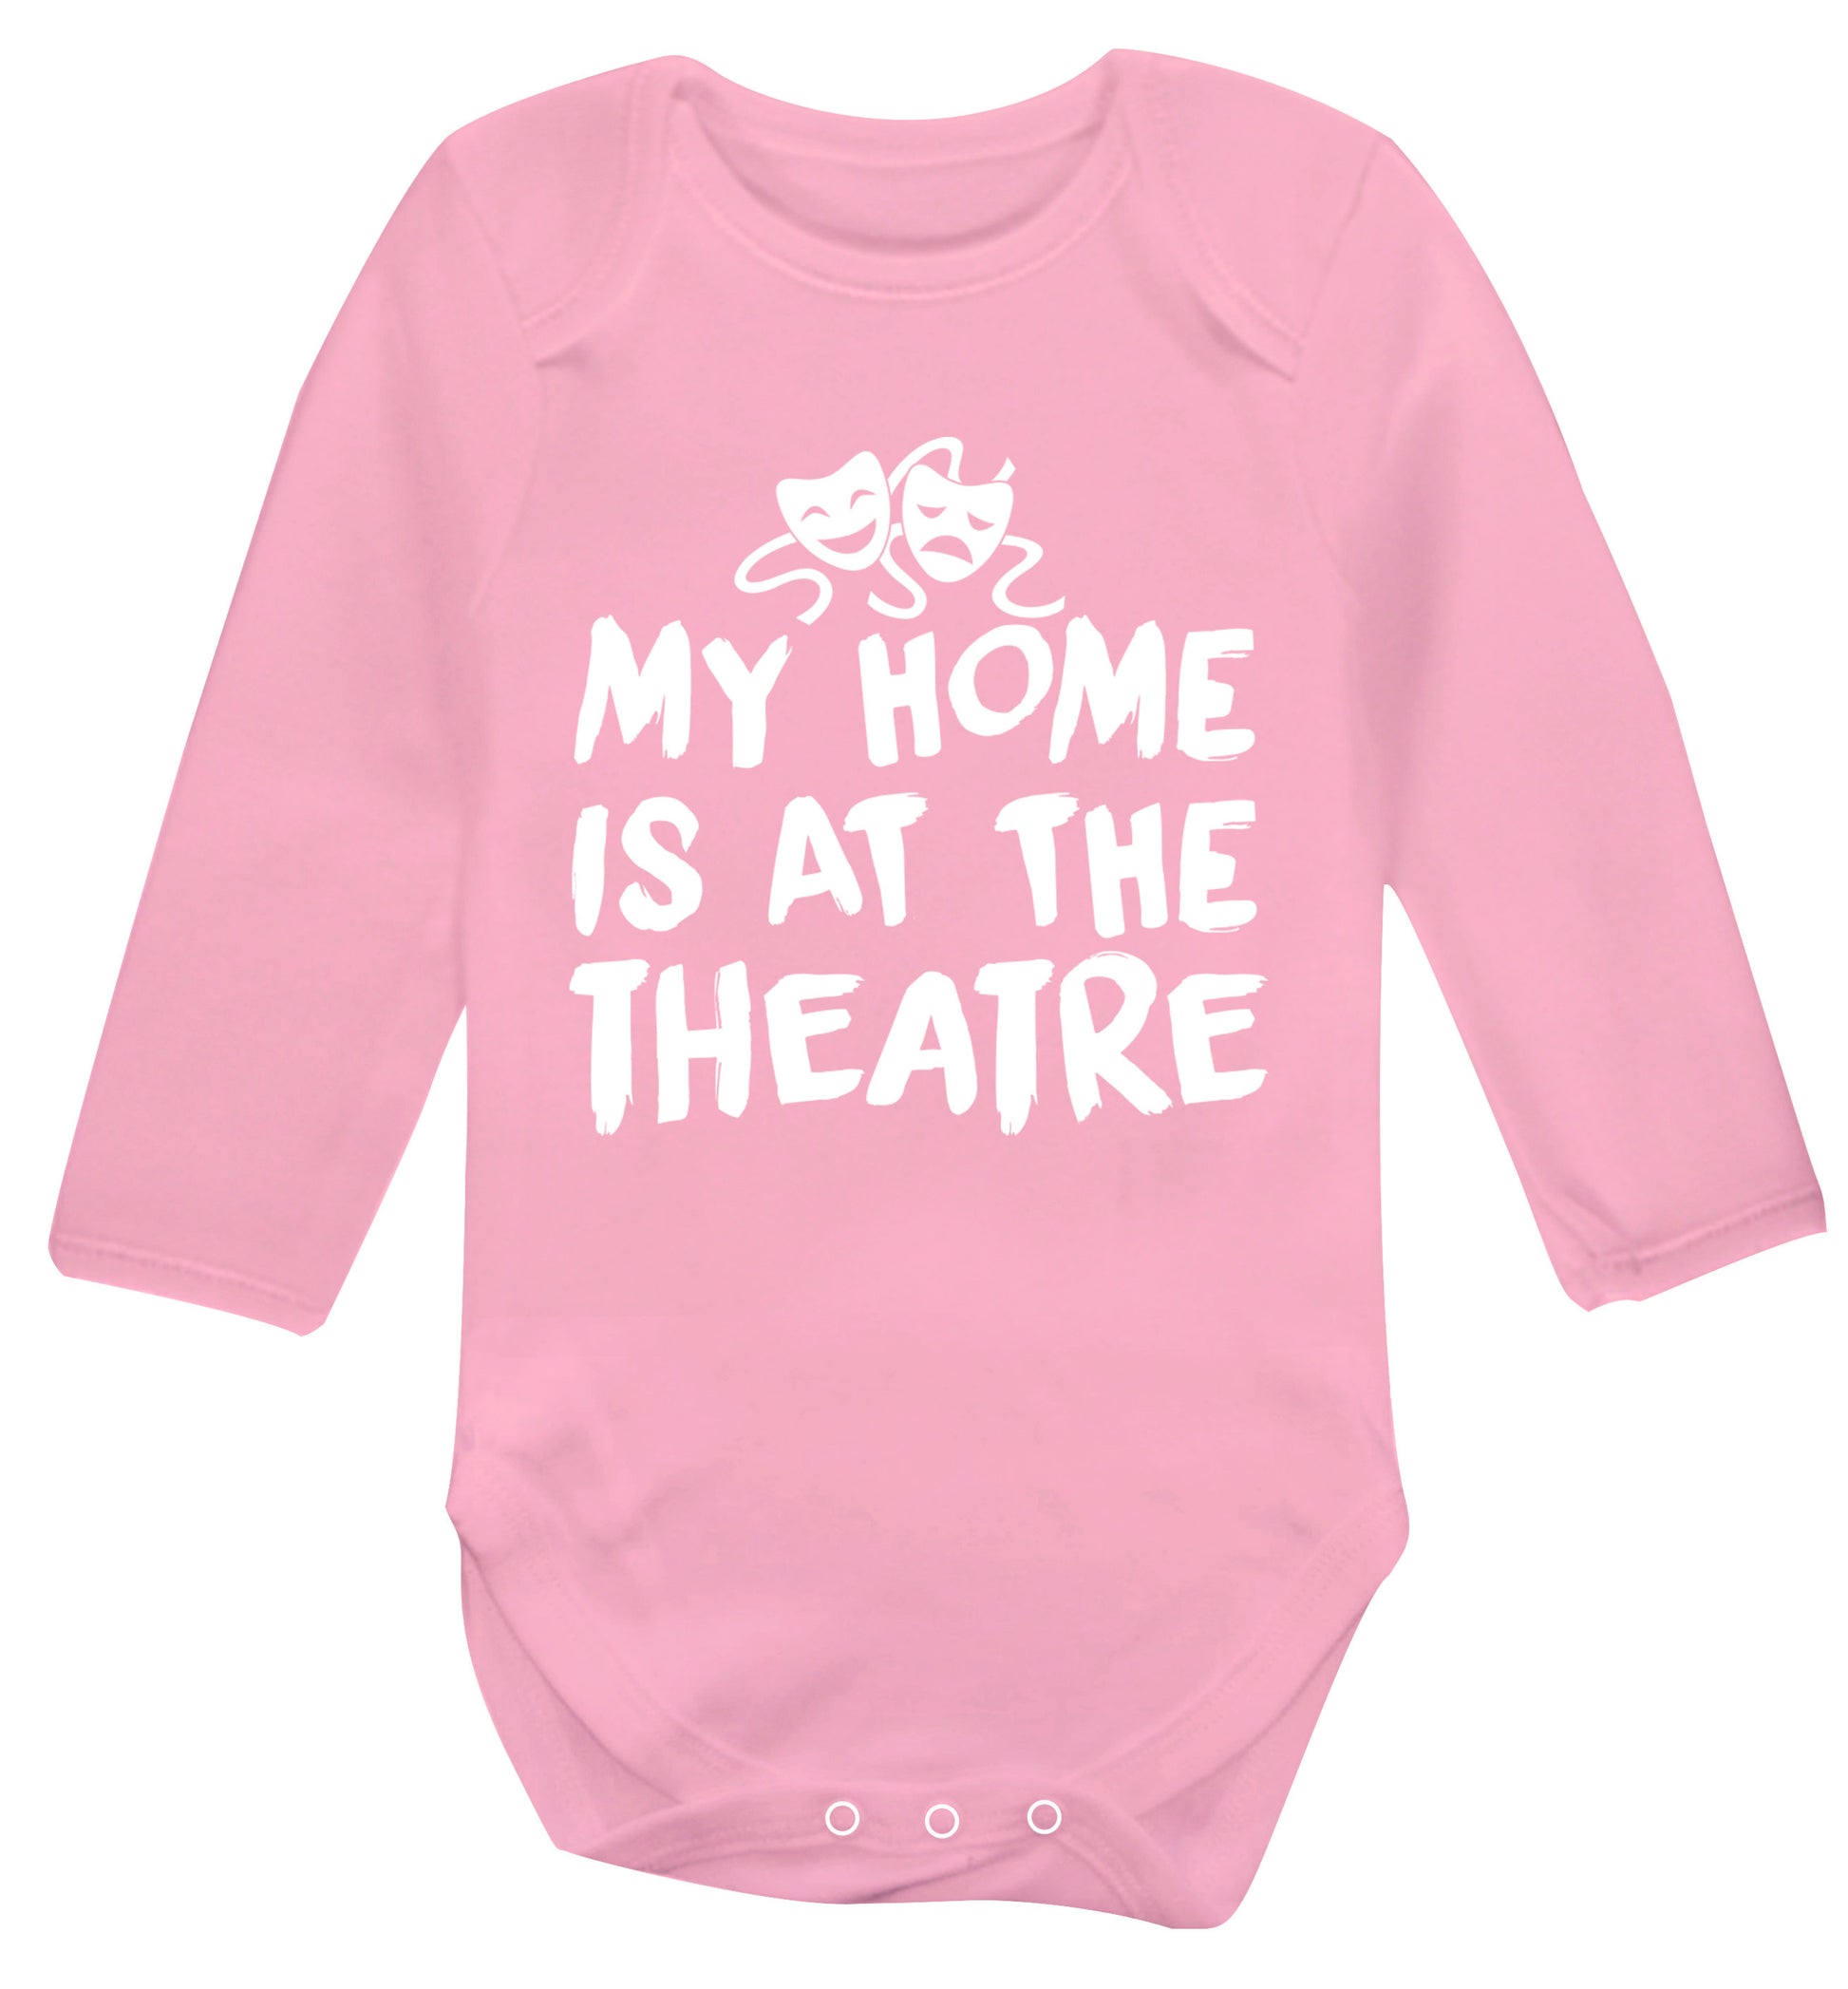 My home is at the theatre Baby Vest long sleeved pale pink 6-12 months